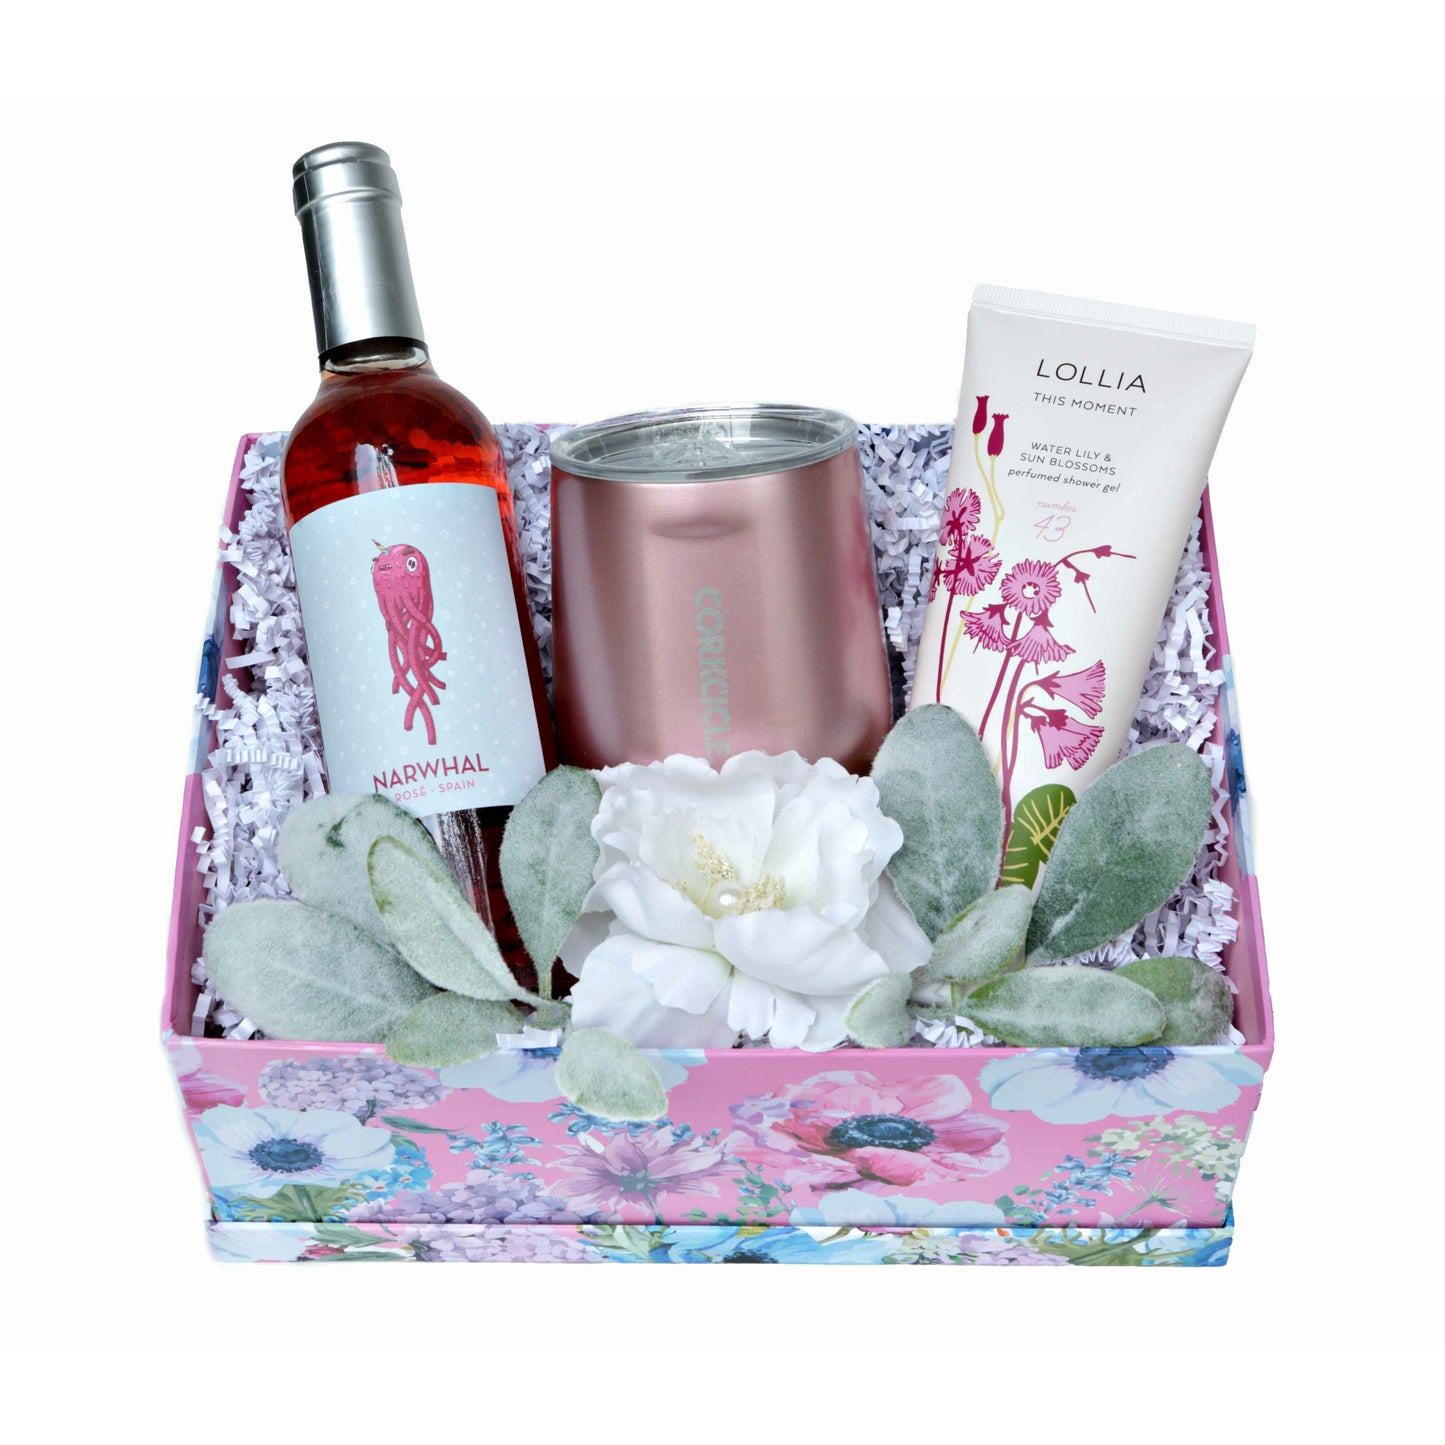 Narwhal Wine & Lollia Moment Water Lilly & Sun Bloosoms Shower Gel  Gift Set - DJW Custom Baskets & Beyond